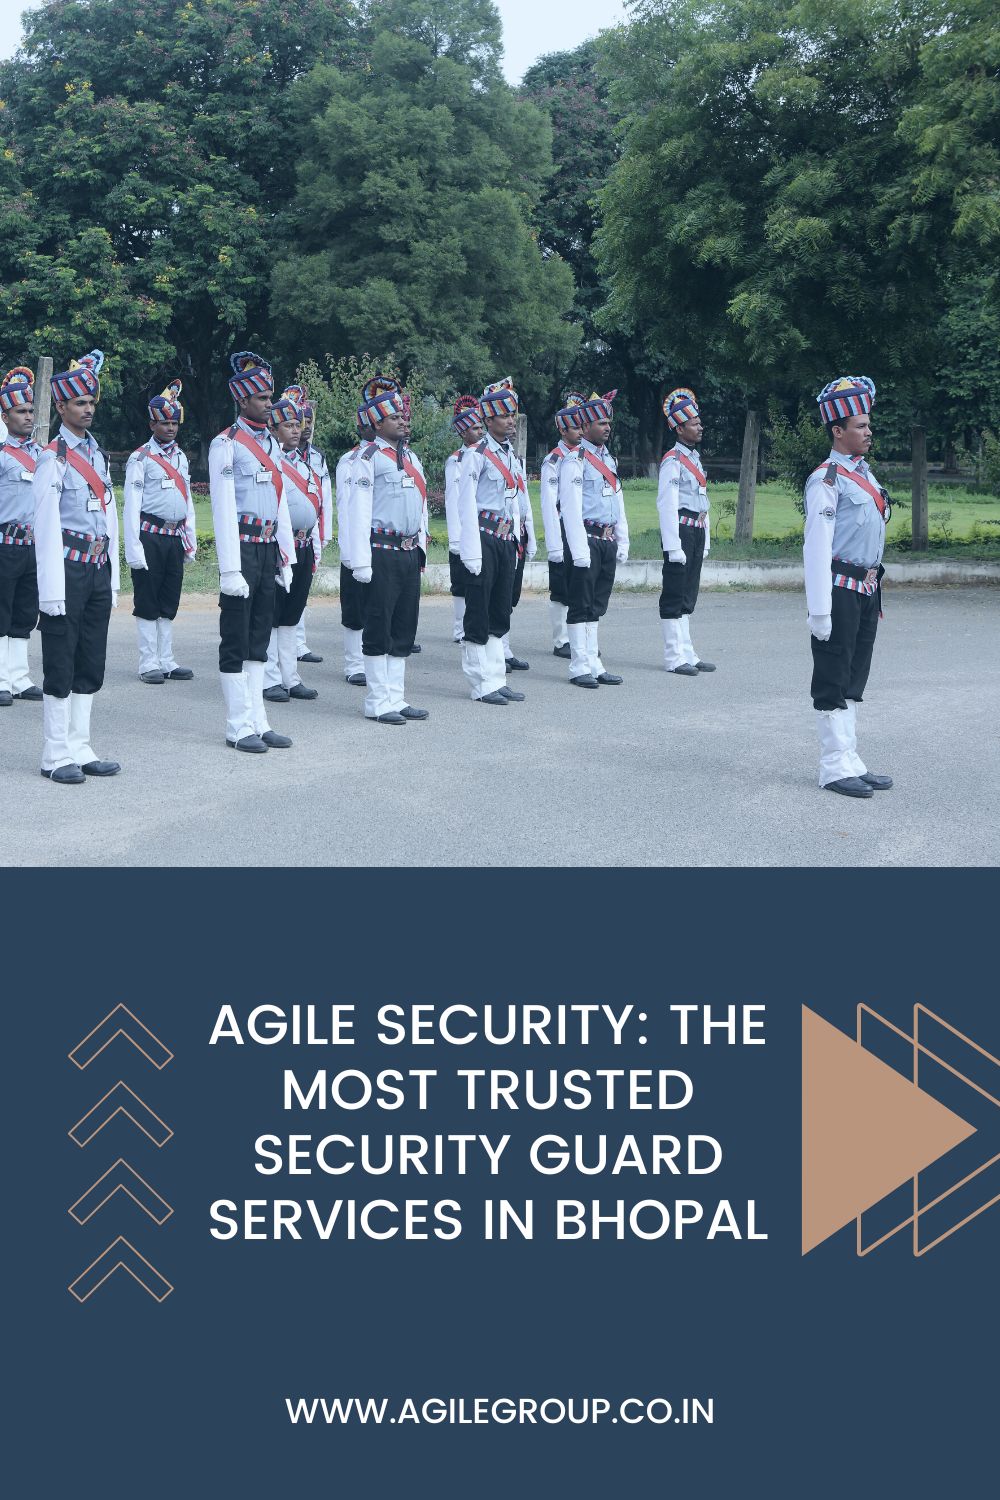  Trusted Security Guard Services in Bhopal - Agile Security